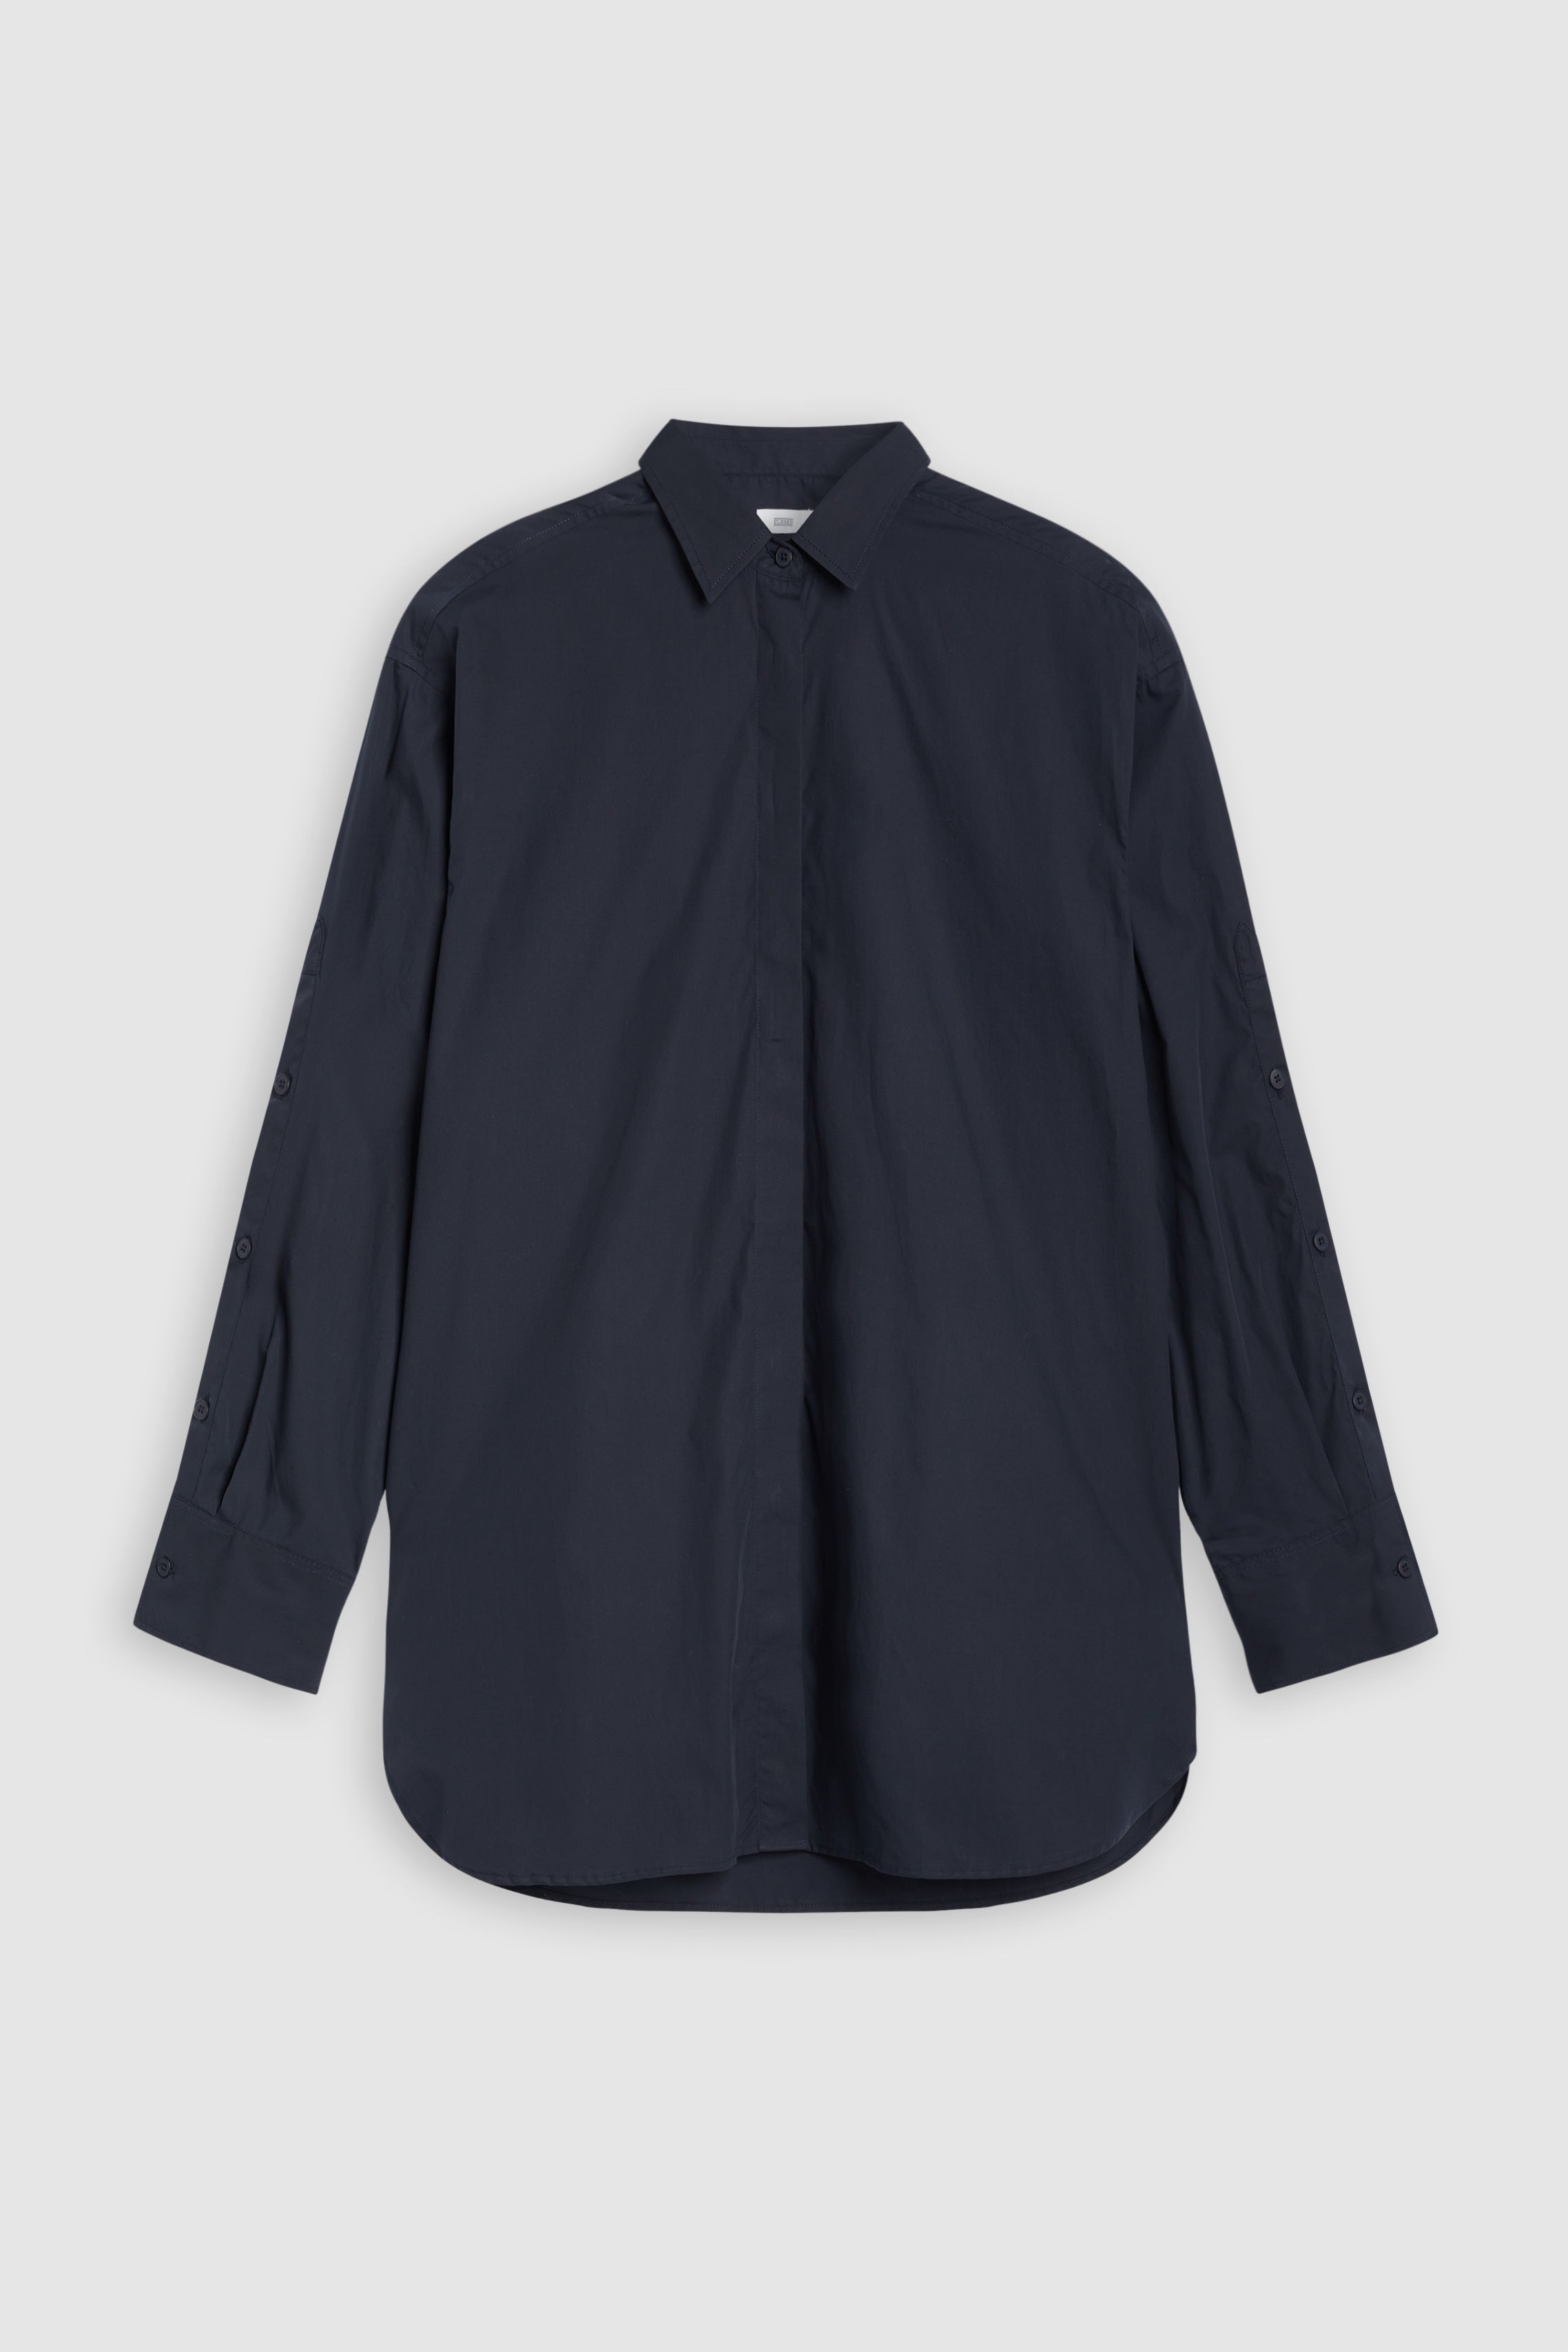 CLOSED-OUTLET-SALE-STYLE-NAME-PLACKET-DETAIL-SHIRT-Blusen-ARCHIVE-COLLECTION-4_6cff55a8-2b77-451c-bc70-d7b067272be4.jpg